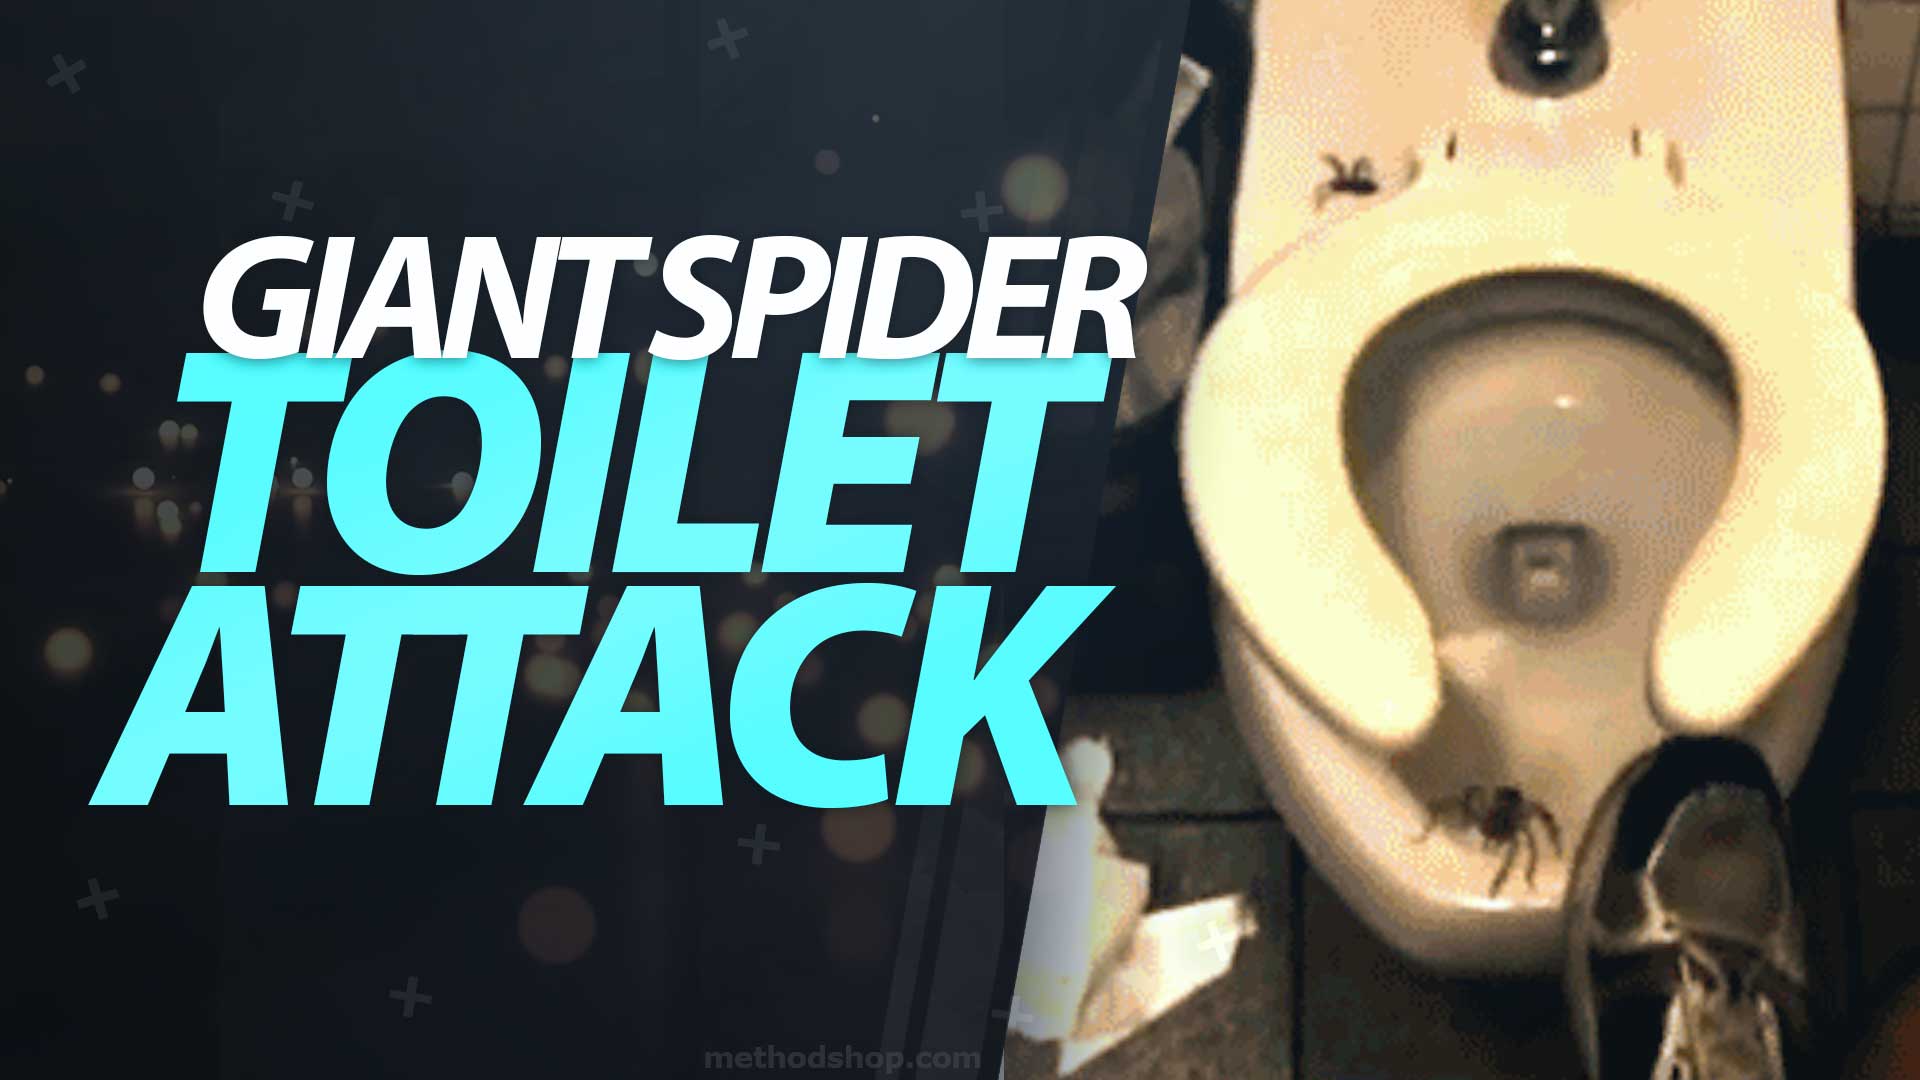 Watch This Giant Spider Jumps Out From Under A Toilet Seat And Attack!